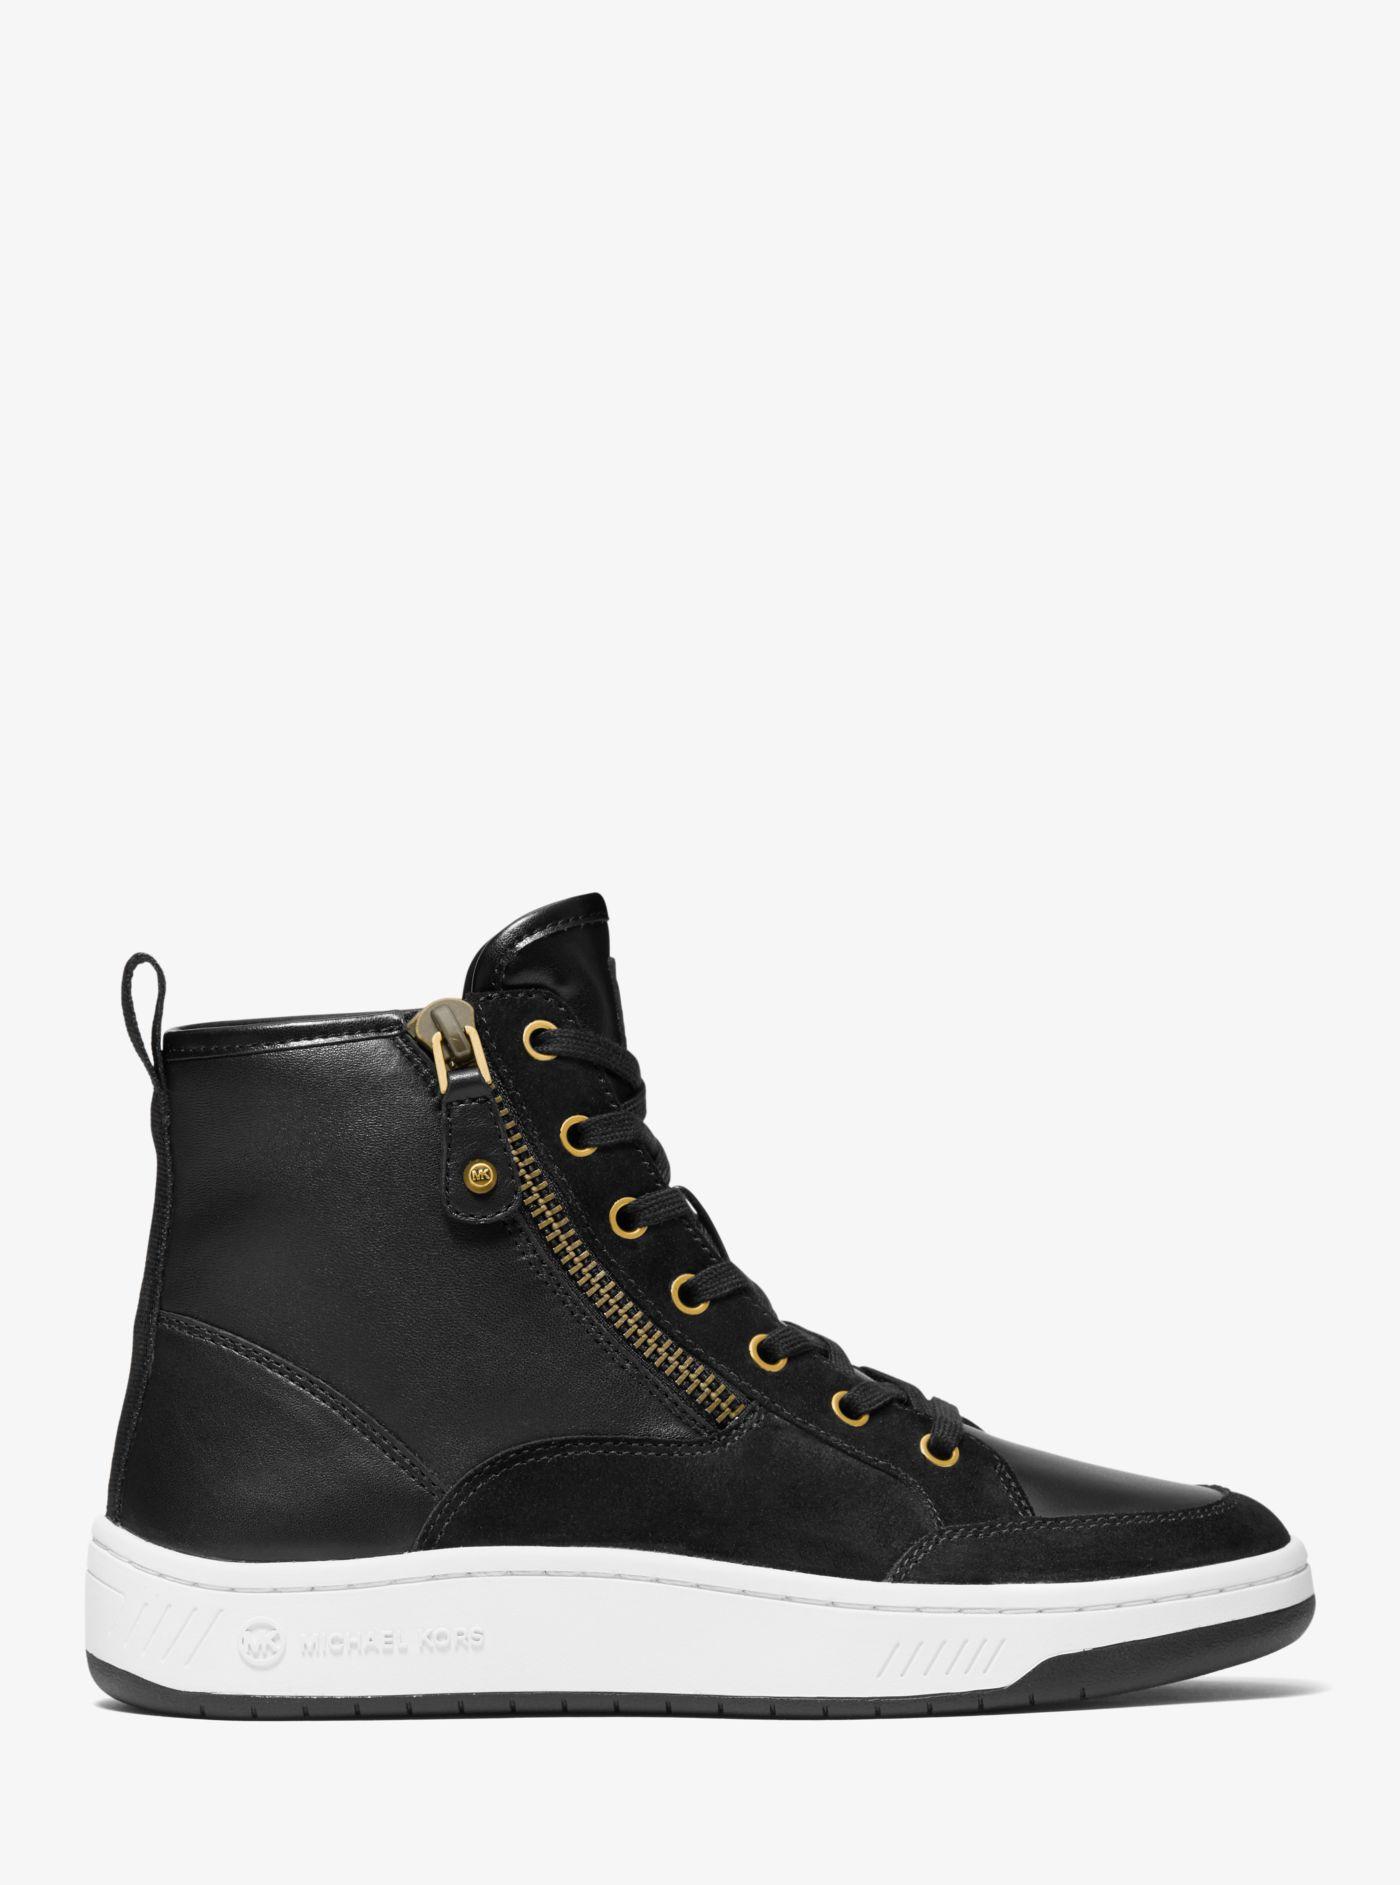 Michael Kors Shea Leather And Suede High Top Sneaker in Black | Lyst